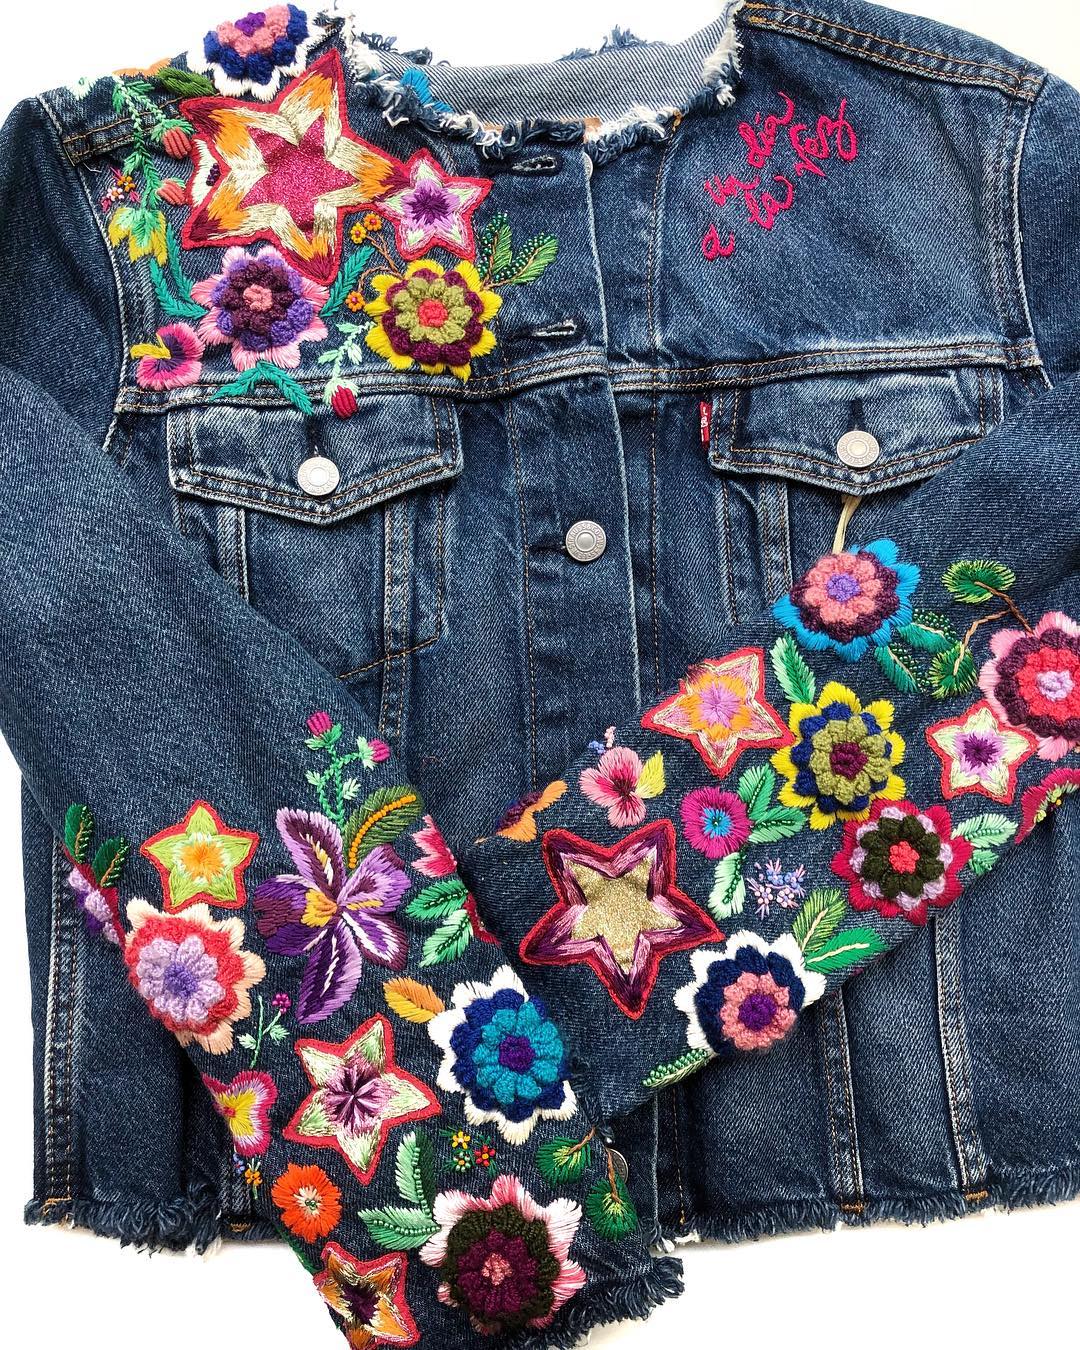 Colorful Embroideries Transforms Humble Denim Jackets into Wearable ...